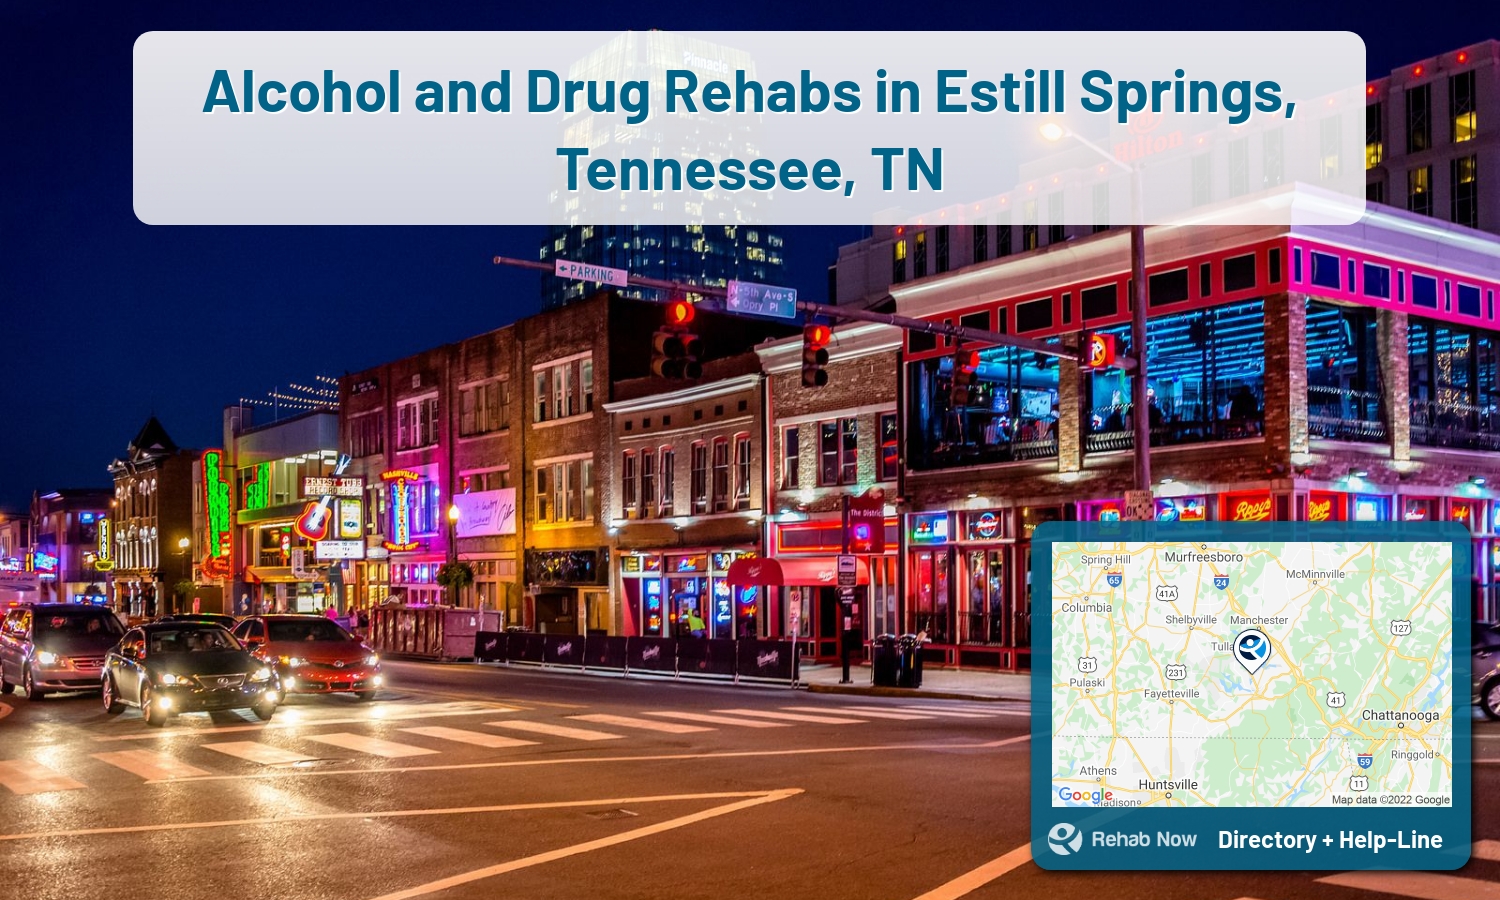 Drug rehab and alcohol treatment services nearby Estill Springs, TN. Need help choosing a treatment program? Call our free hotline!